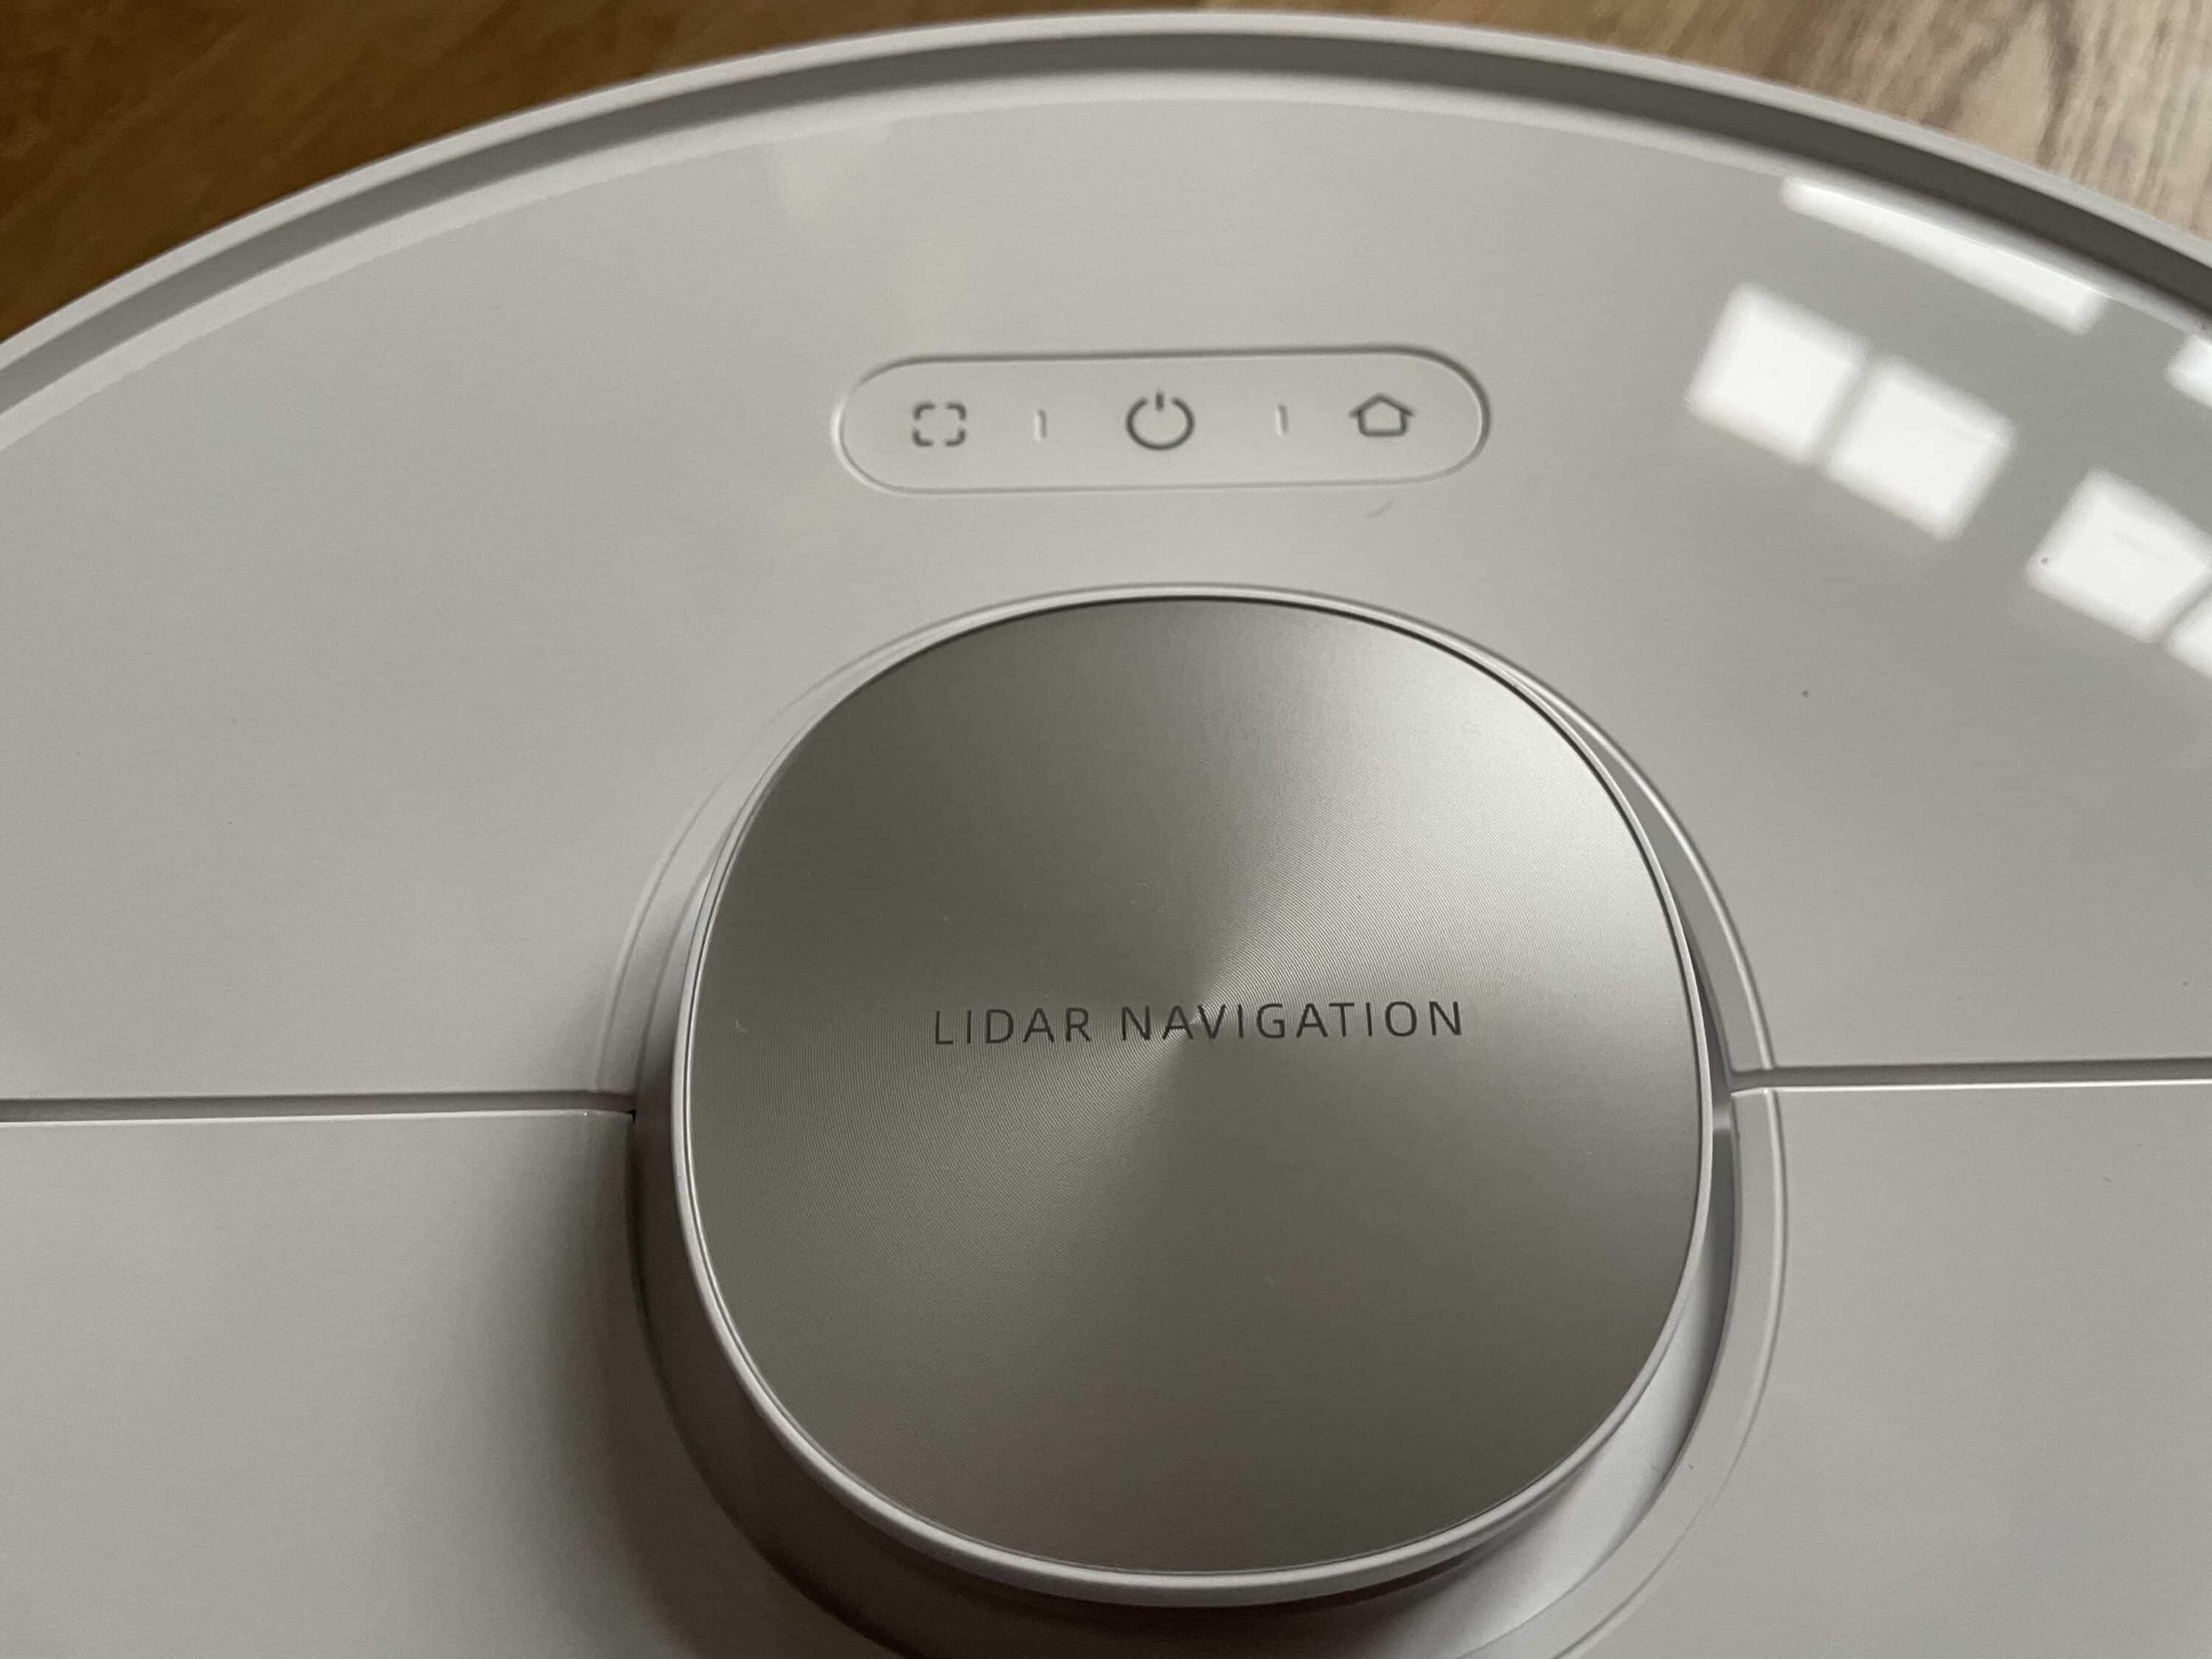 Dreame L10 Ultra Robot Vacuum Cleaner